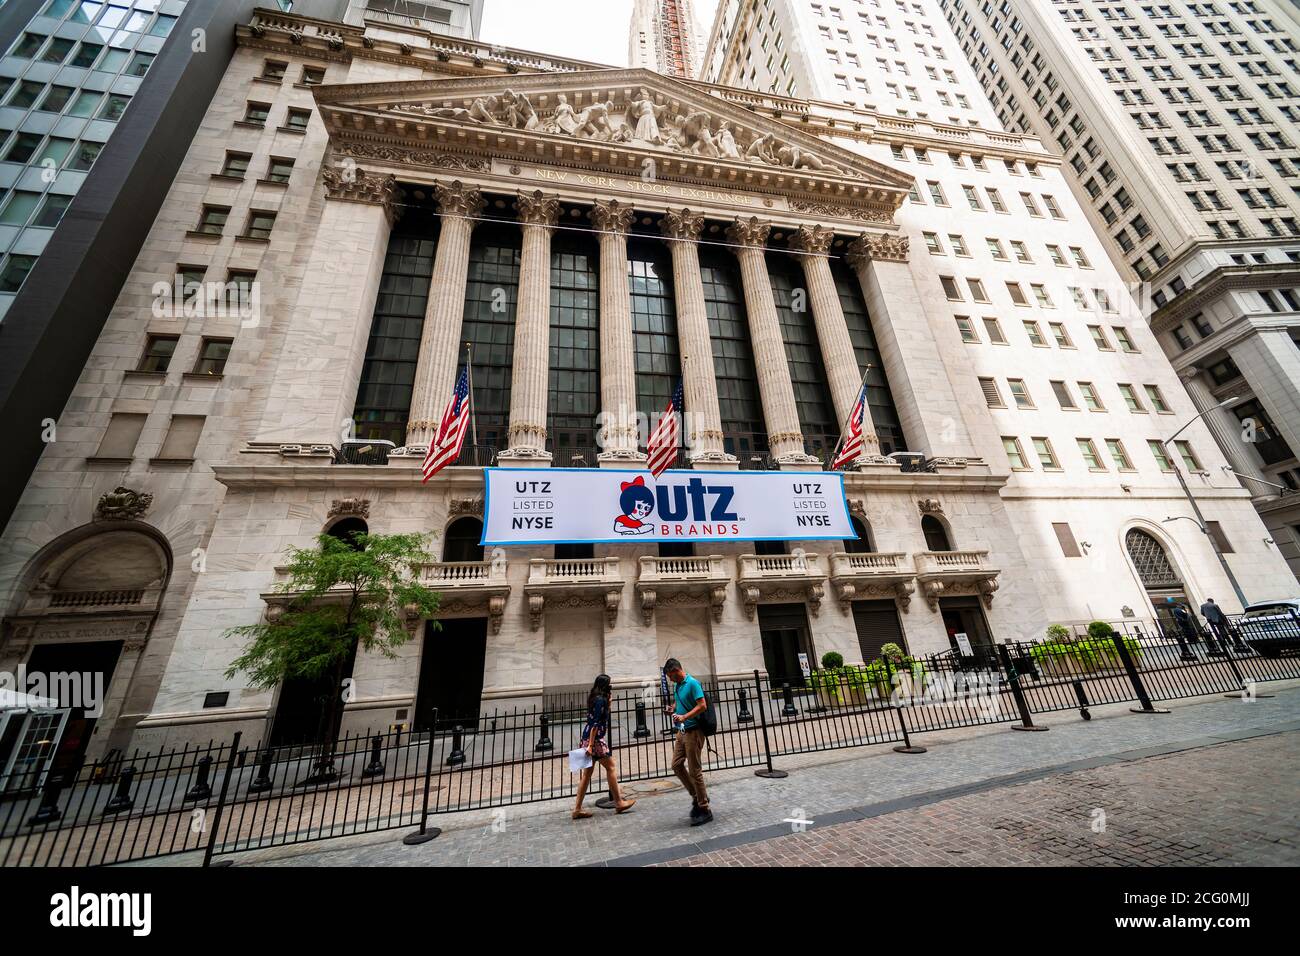 The New York Stock Exchange in New York is decorated on Monday, August 31, 2020 for the initial public offering of Utz Quality Foods. The 99 year-old family owned company gained market share during the pandemic as consumers, locked down and bored, gorged on its snack brands. In addition to the IPO, action at the NYSE includes changes to how the Dow Jones Industrial Average is calculated take place today. (© Richard B. Levine) Stock Photo